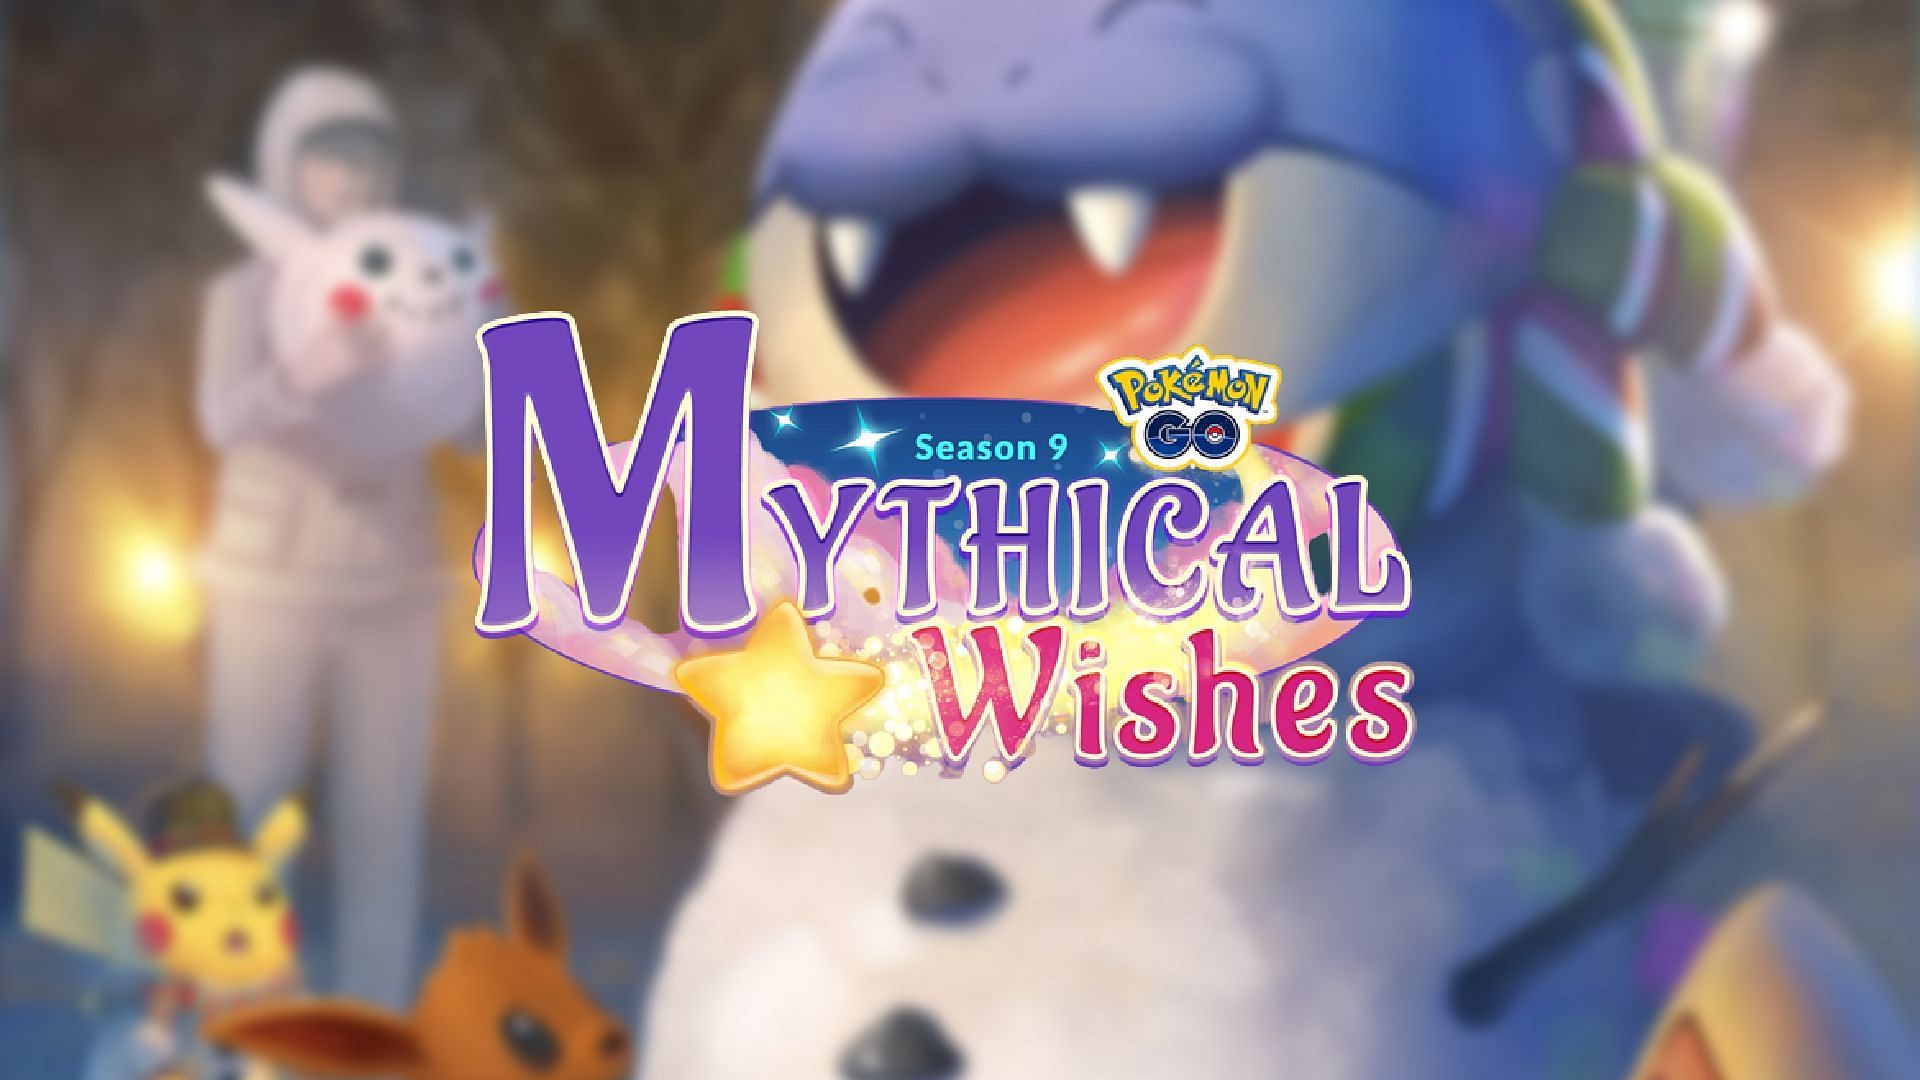 Mythical Wishes is here (Image via Pokemon GO)